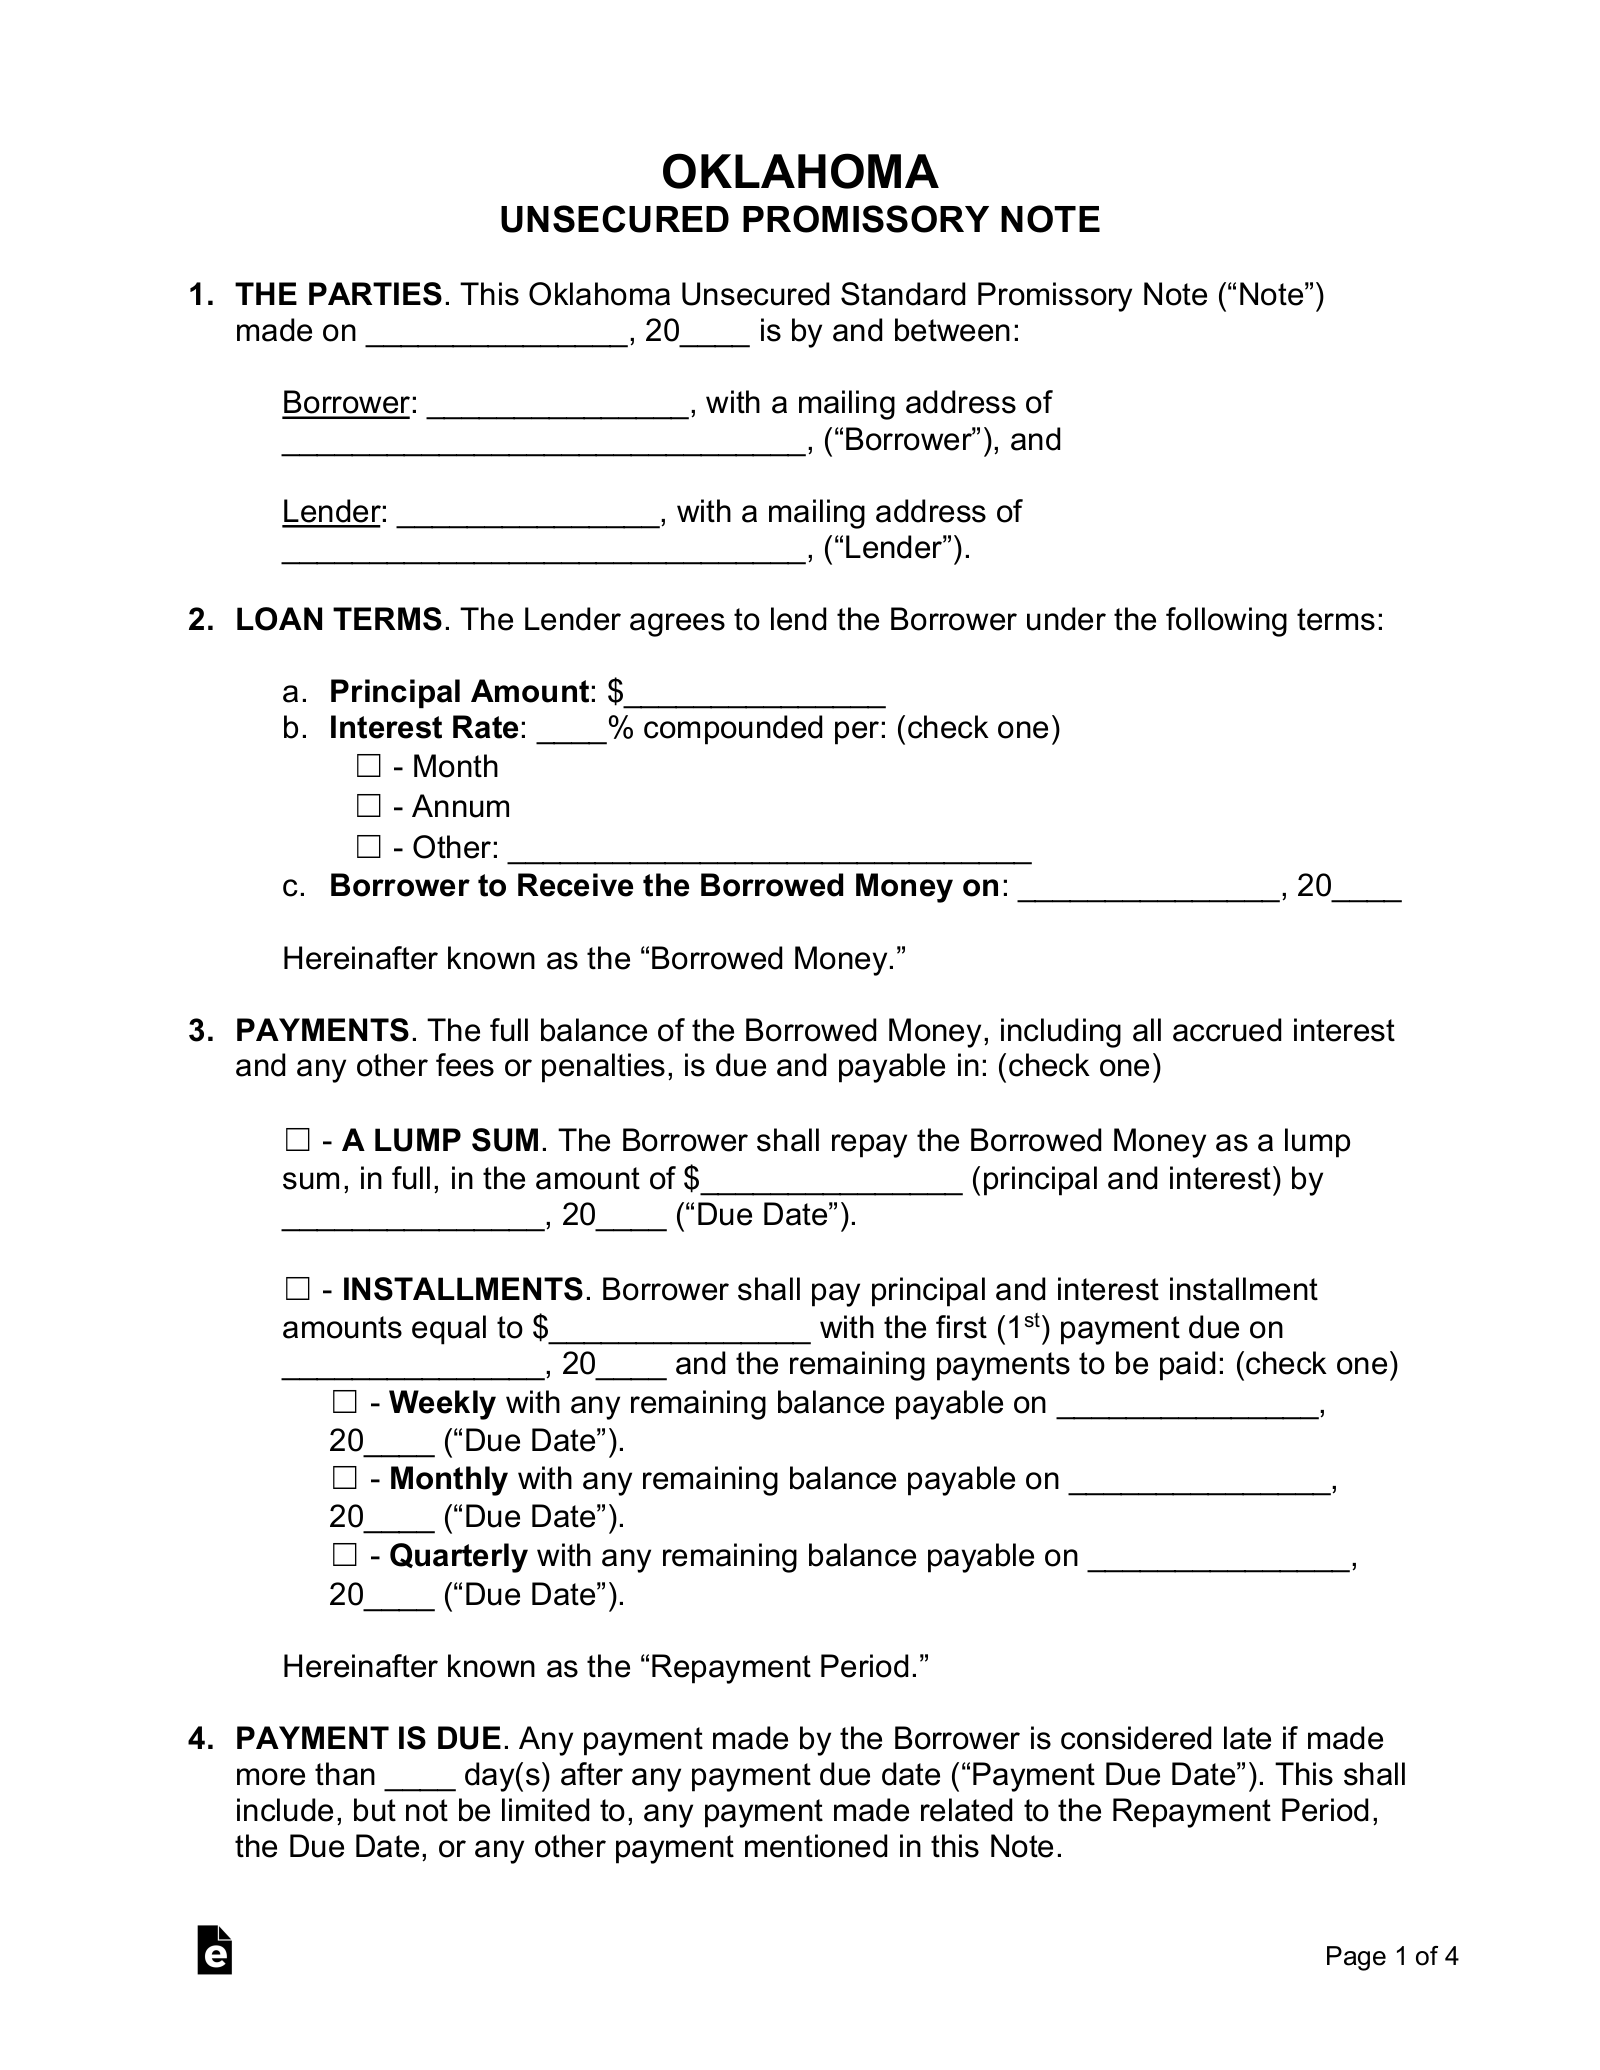 Oklahoma Unsecured Promissory Note Template